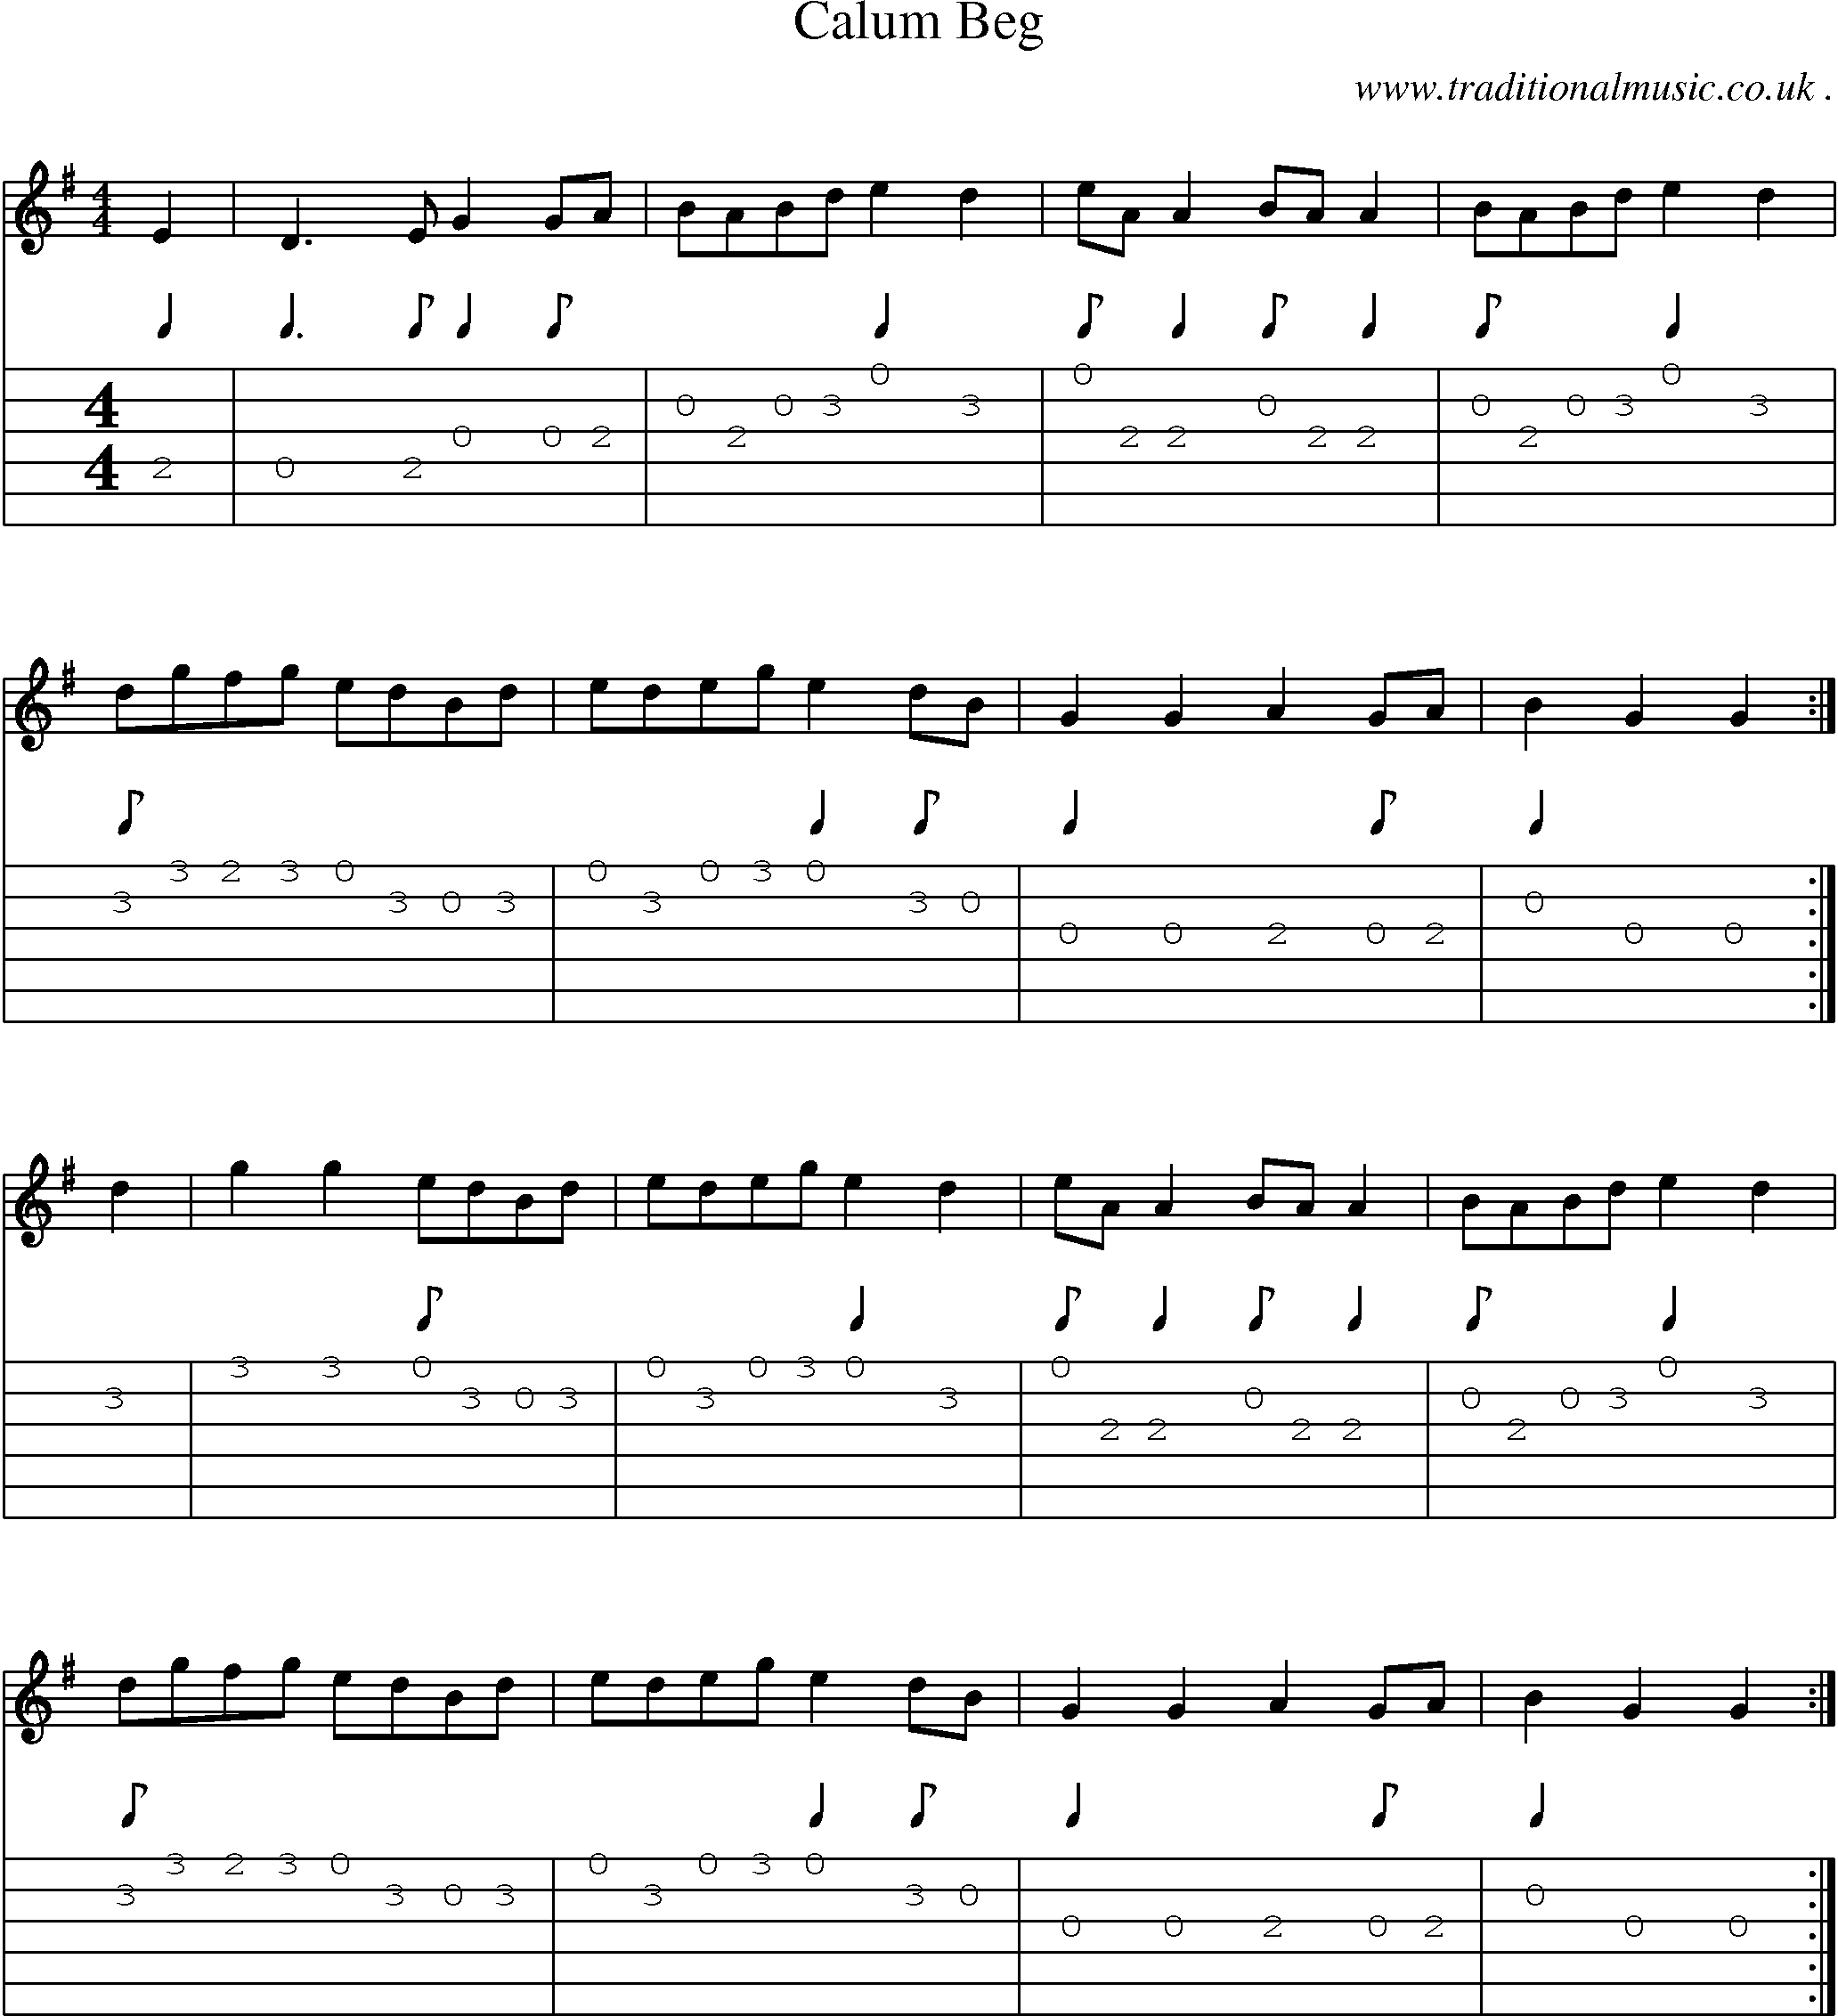 Sheet-music  score, Chords and Guitar Tabs for Calum Beg